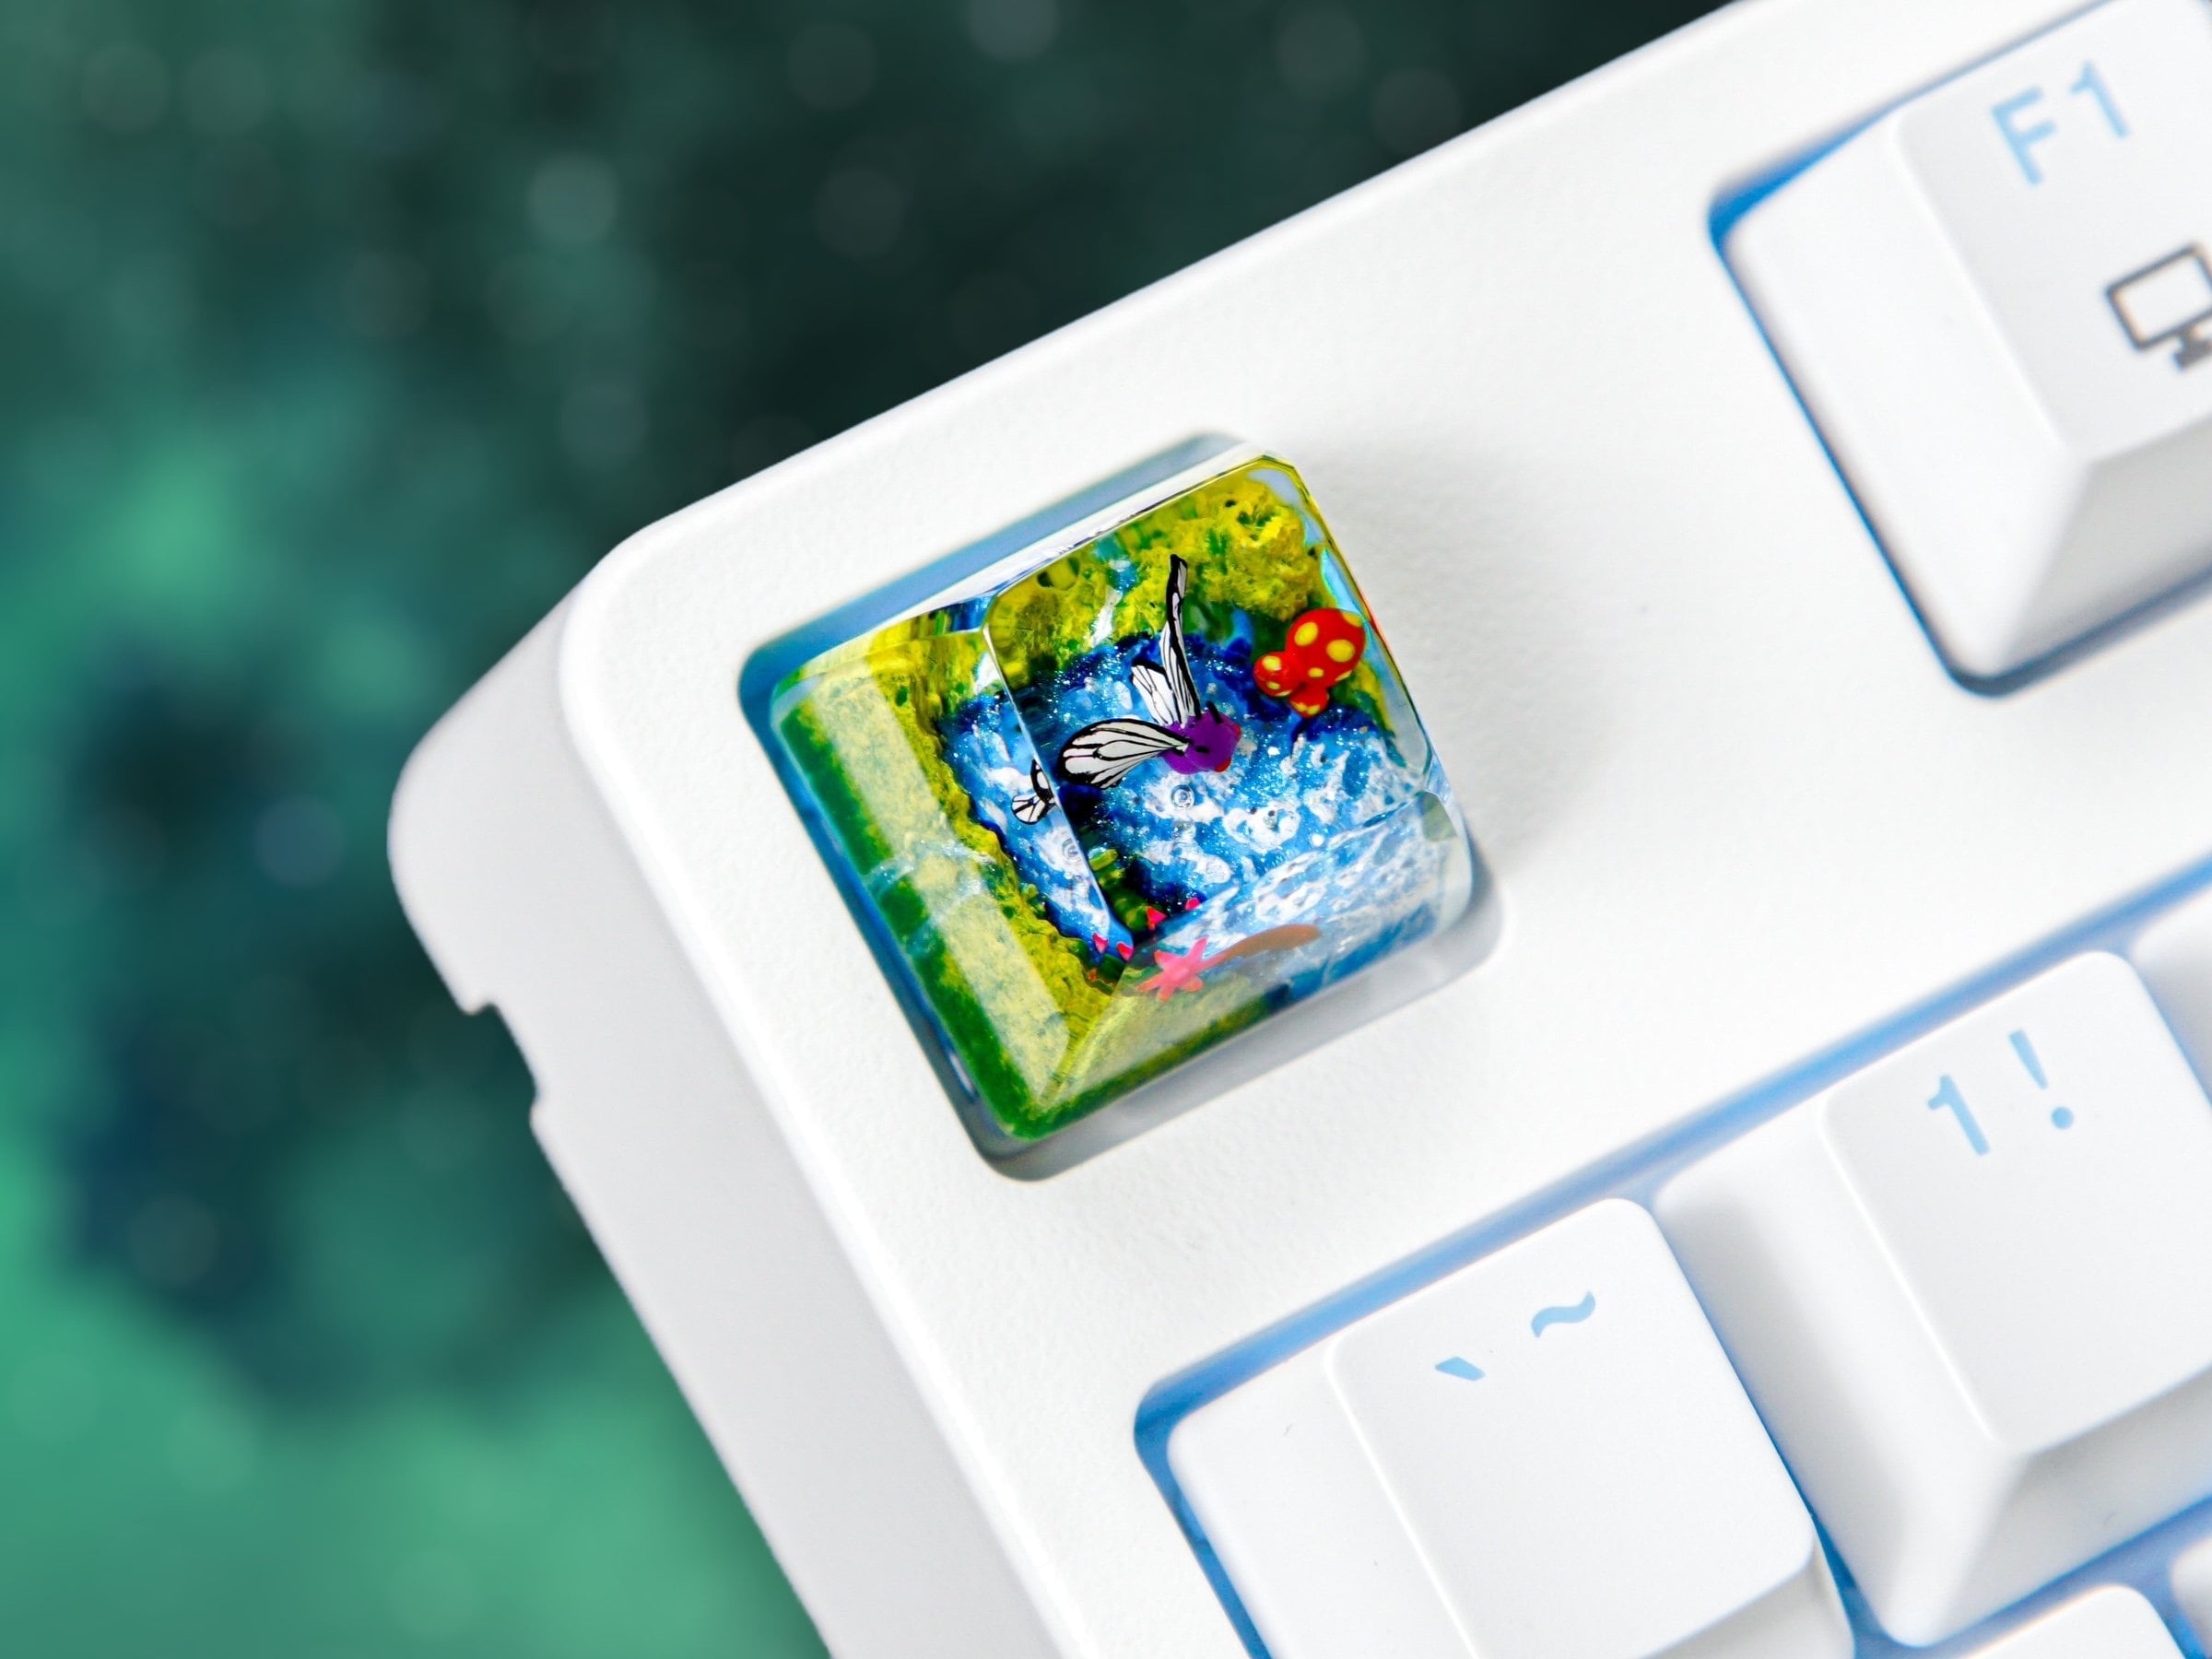 Butterfree Keycap, Pokemon Keycap, Artisan Keycap, Keycap For Cherry MX Switches Mechanical Keyboard, Gift for Him